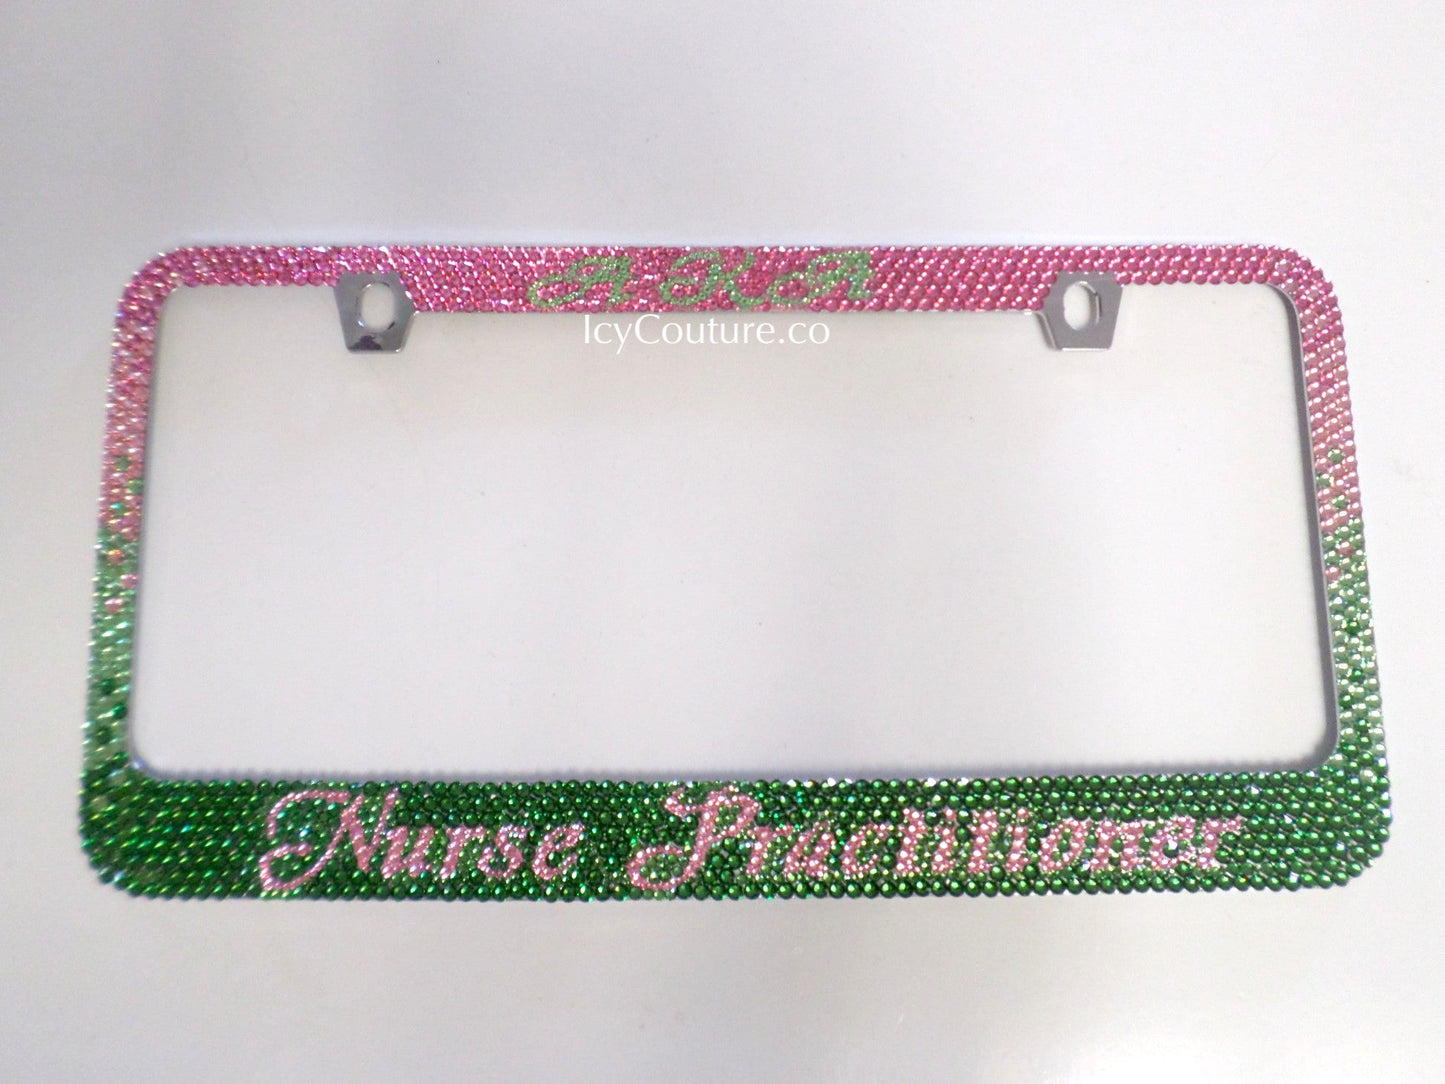 AKA Bling License Plate Frames With Swarovski Crystals, Bedazzled by ICY Couture